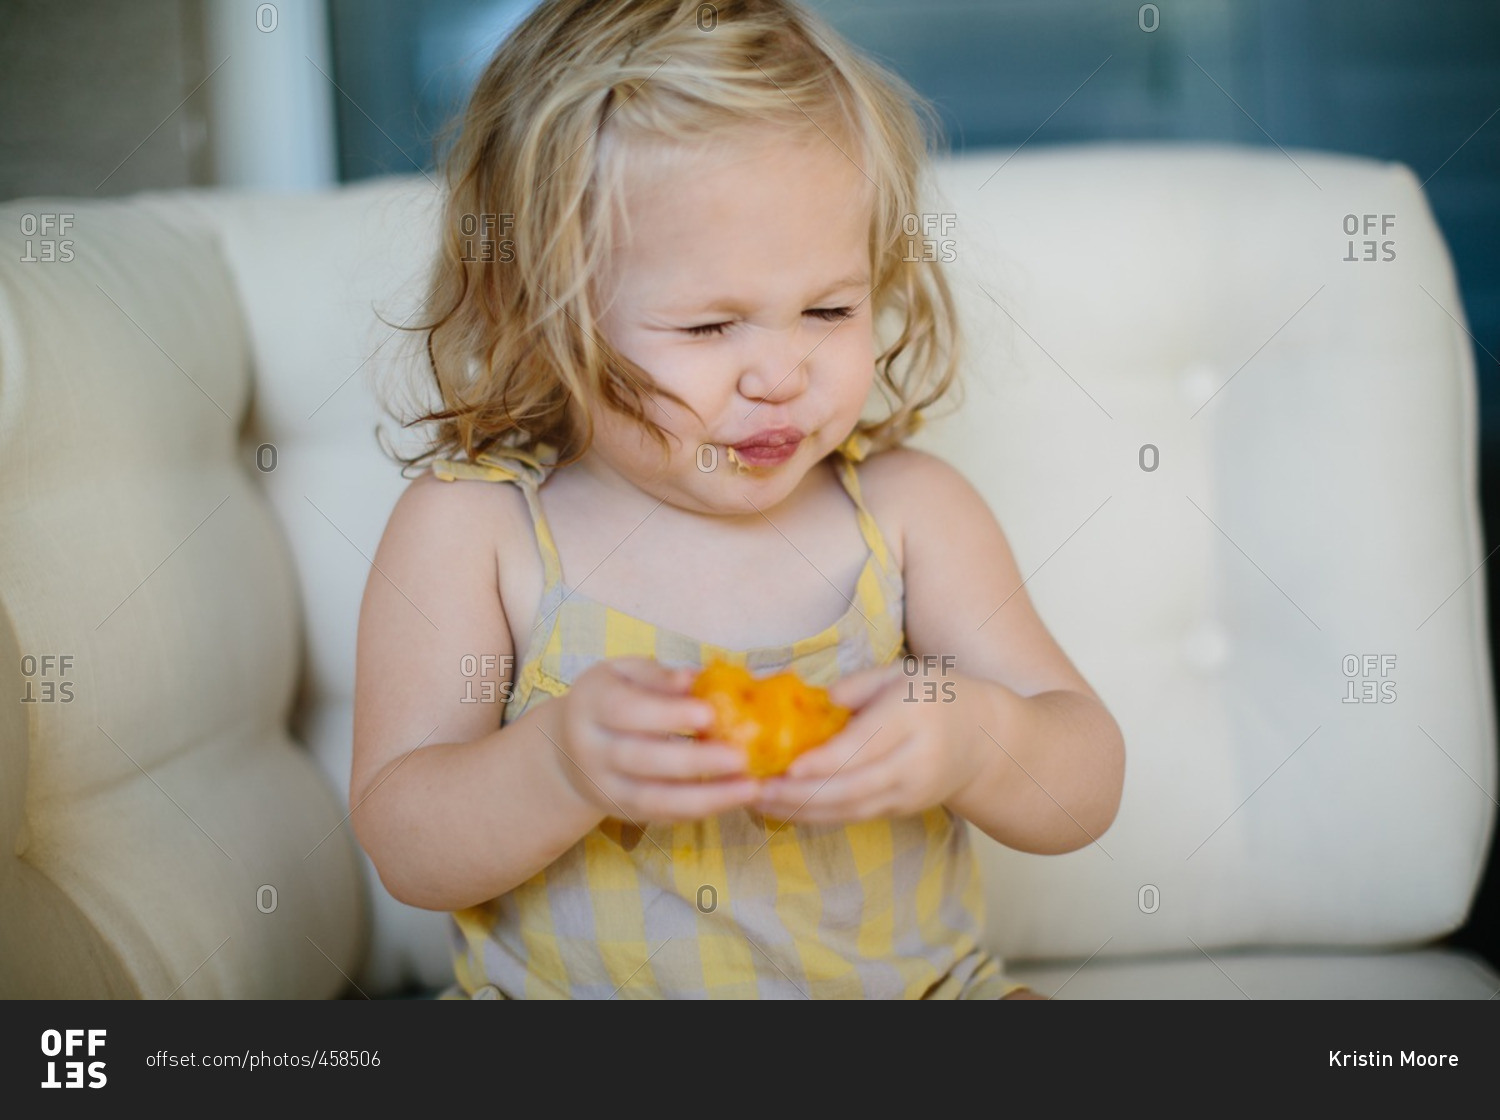 Toddler girl making a sour face while eating an orange